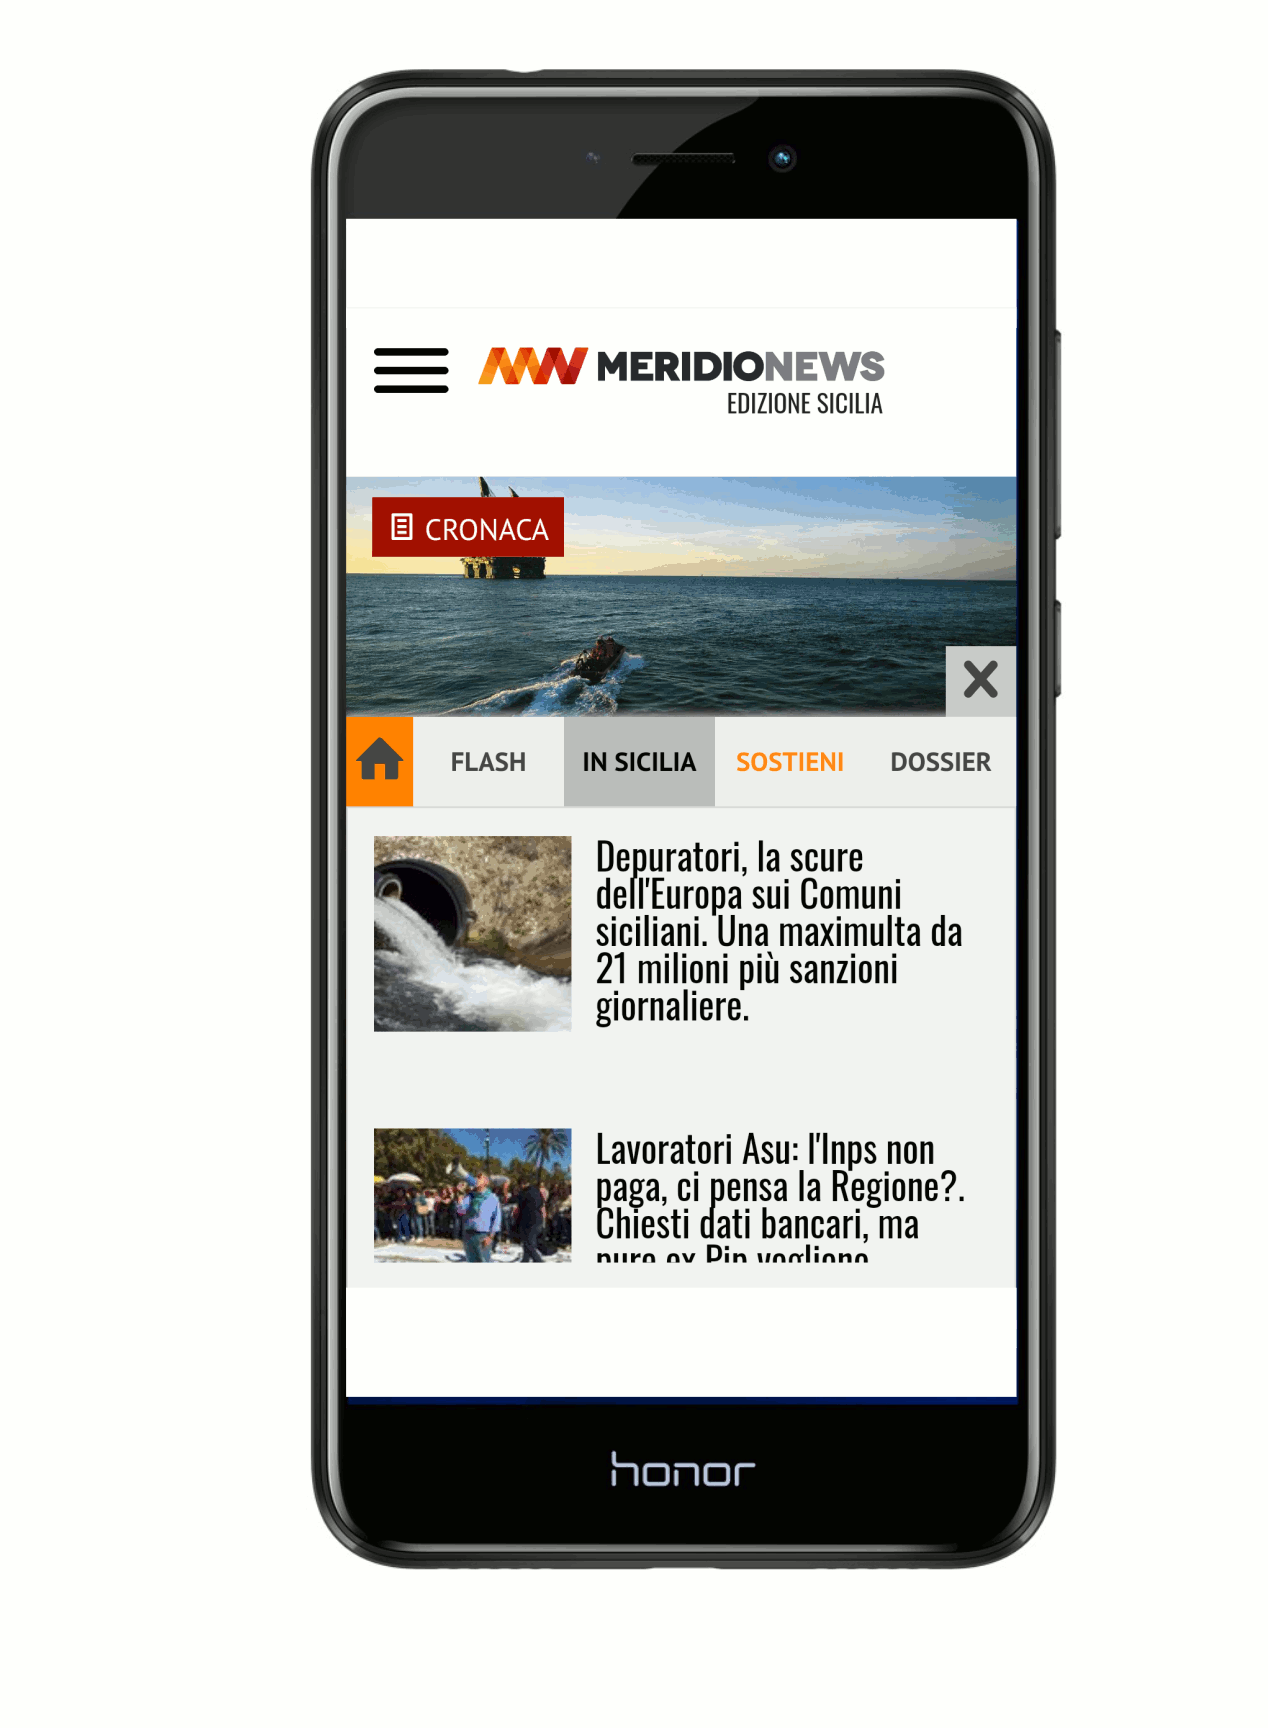 mobile-experience-meridionews